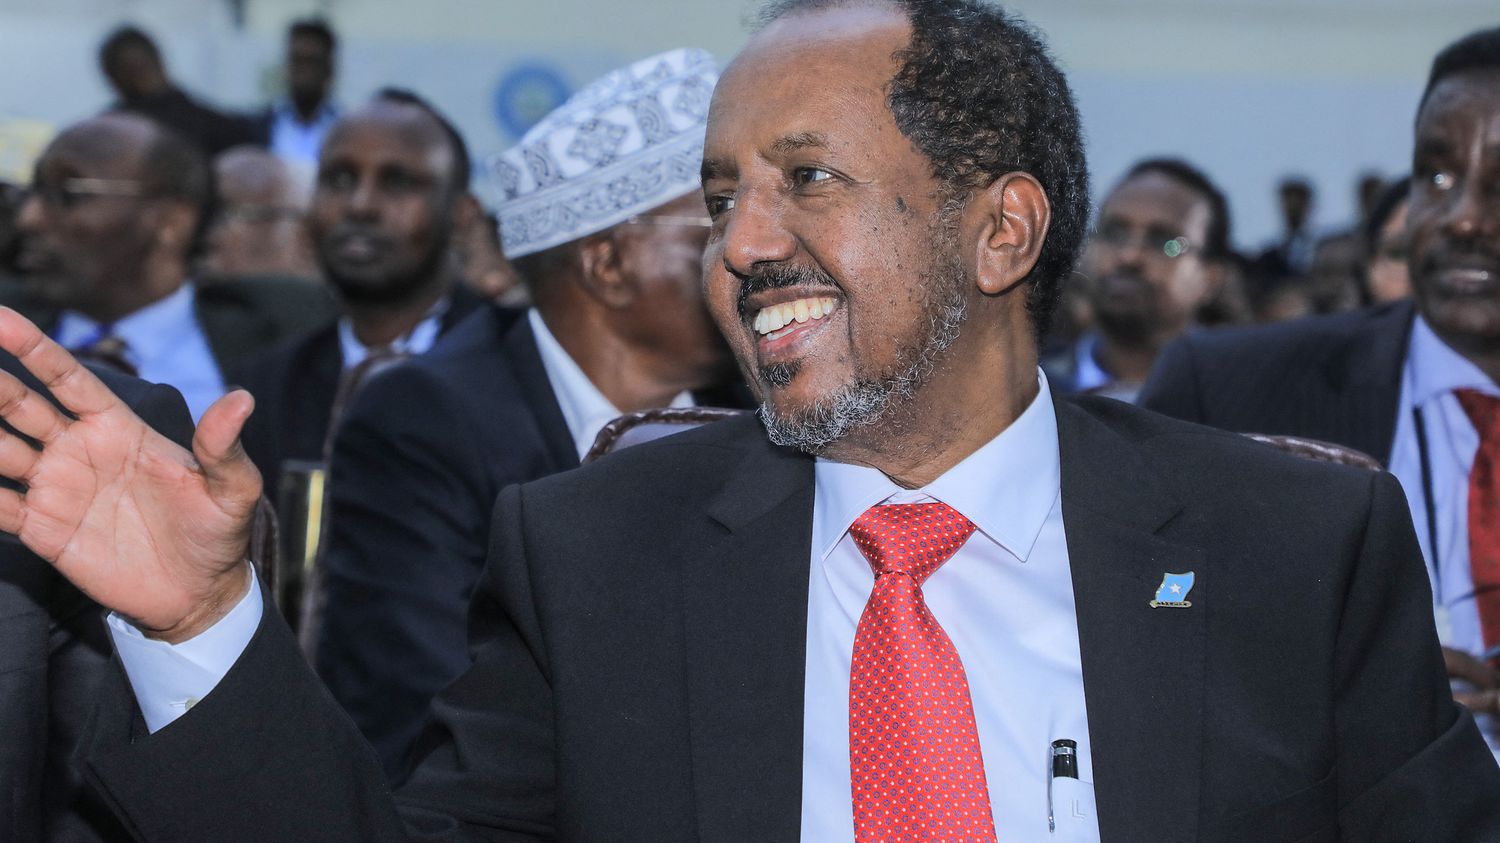 Who is Hassan Cheikh Mohamoud, the new president of Somalia?
